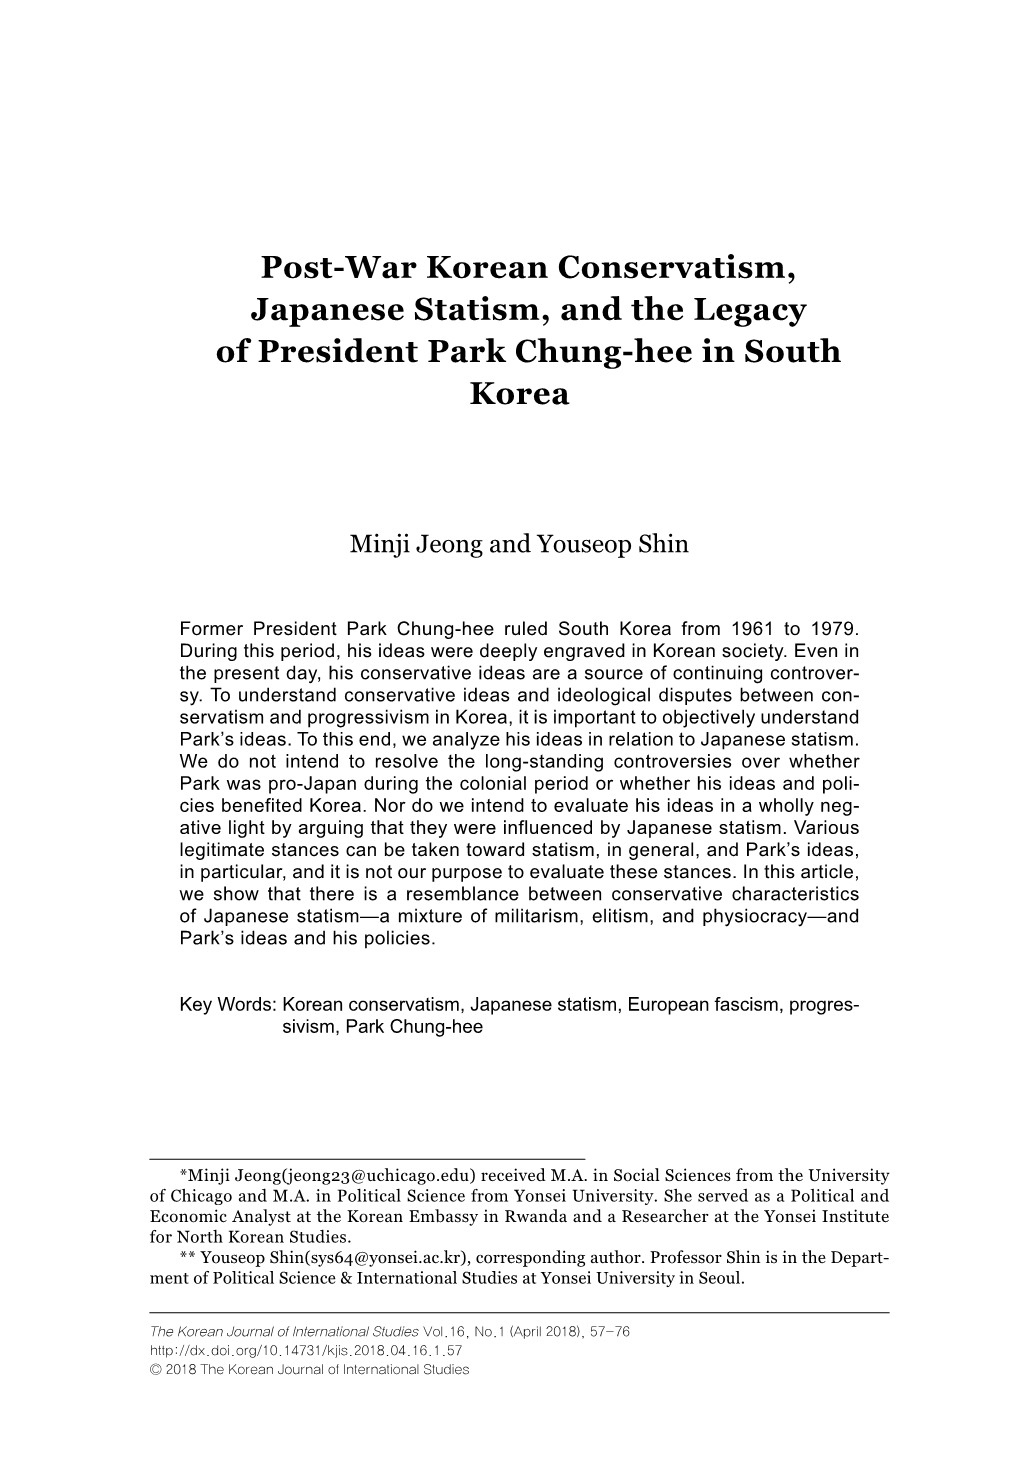 Post-War Korean Conservatism, Japanese Statism, and the Legacy of President Park Chung-Hee in South Korea